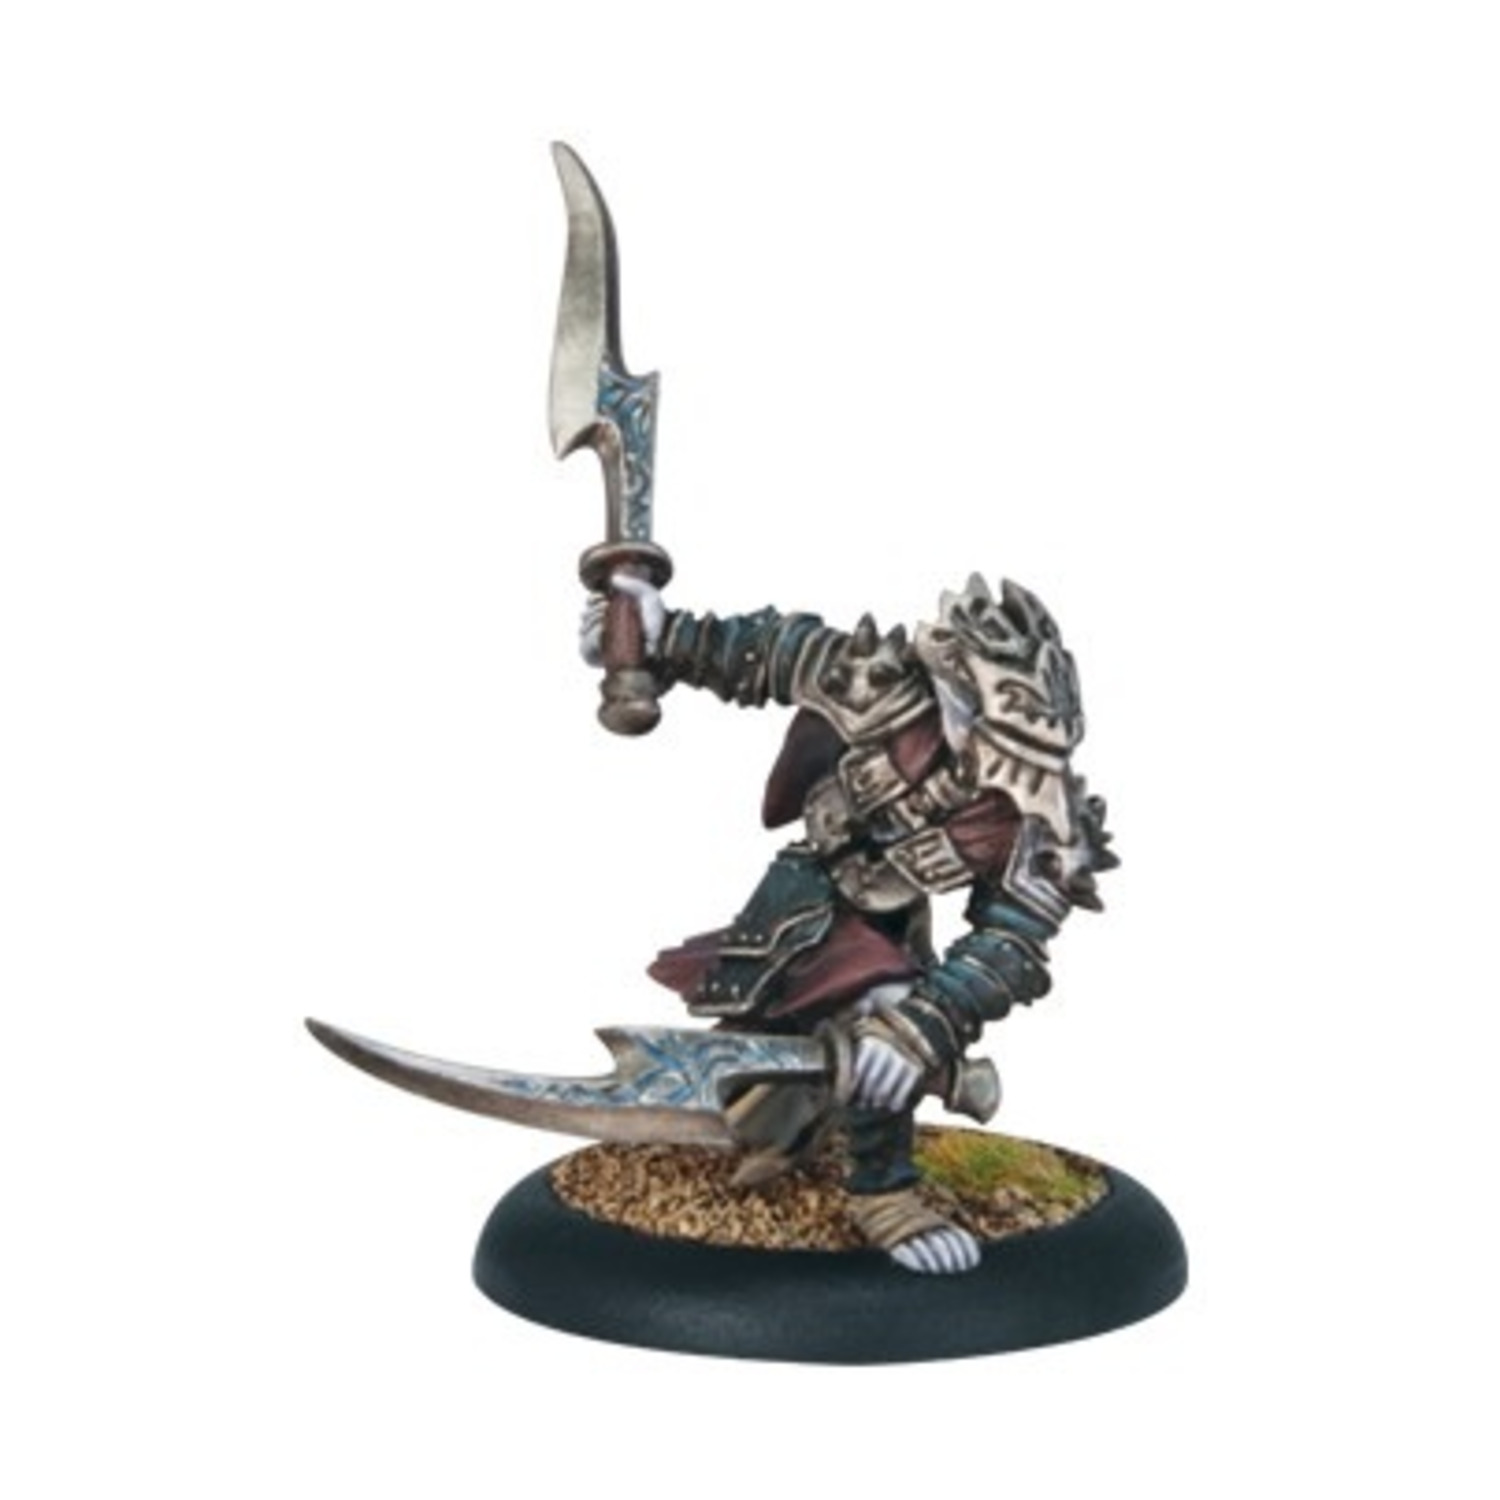 Bayal - Hound of Everblight, Hex Hunter Unit Attachment New - image 1 of 3